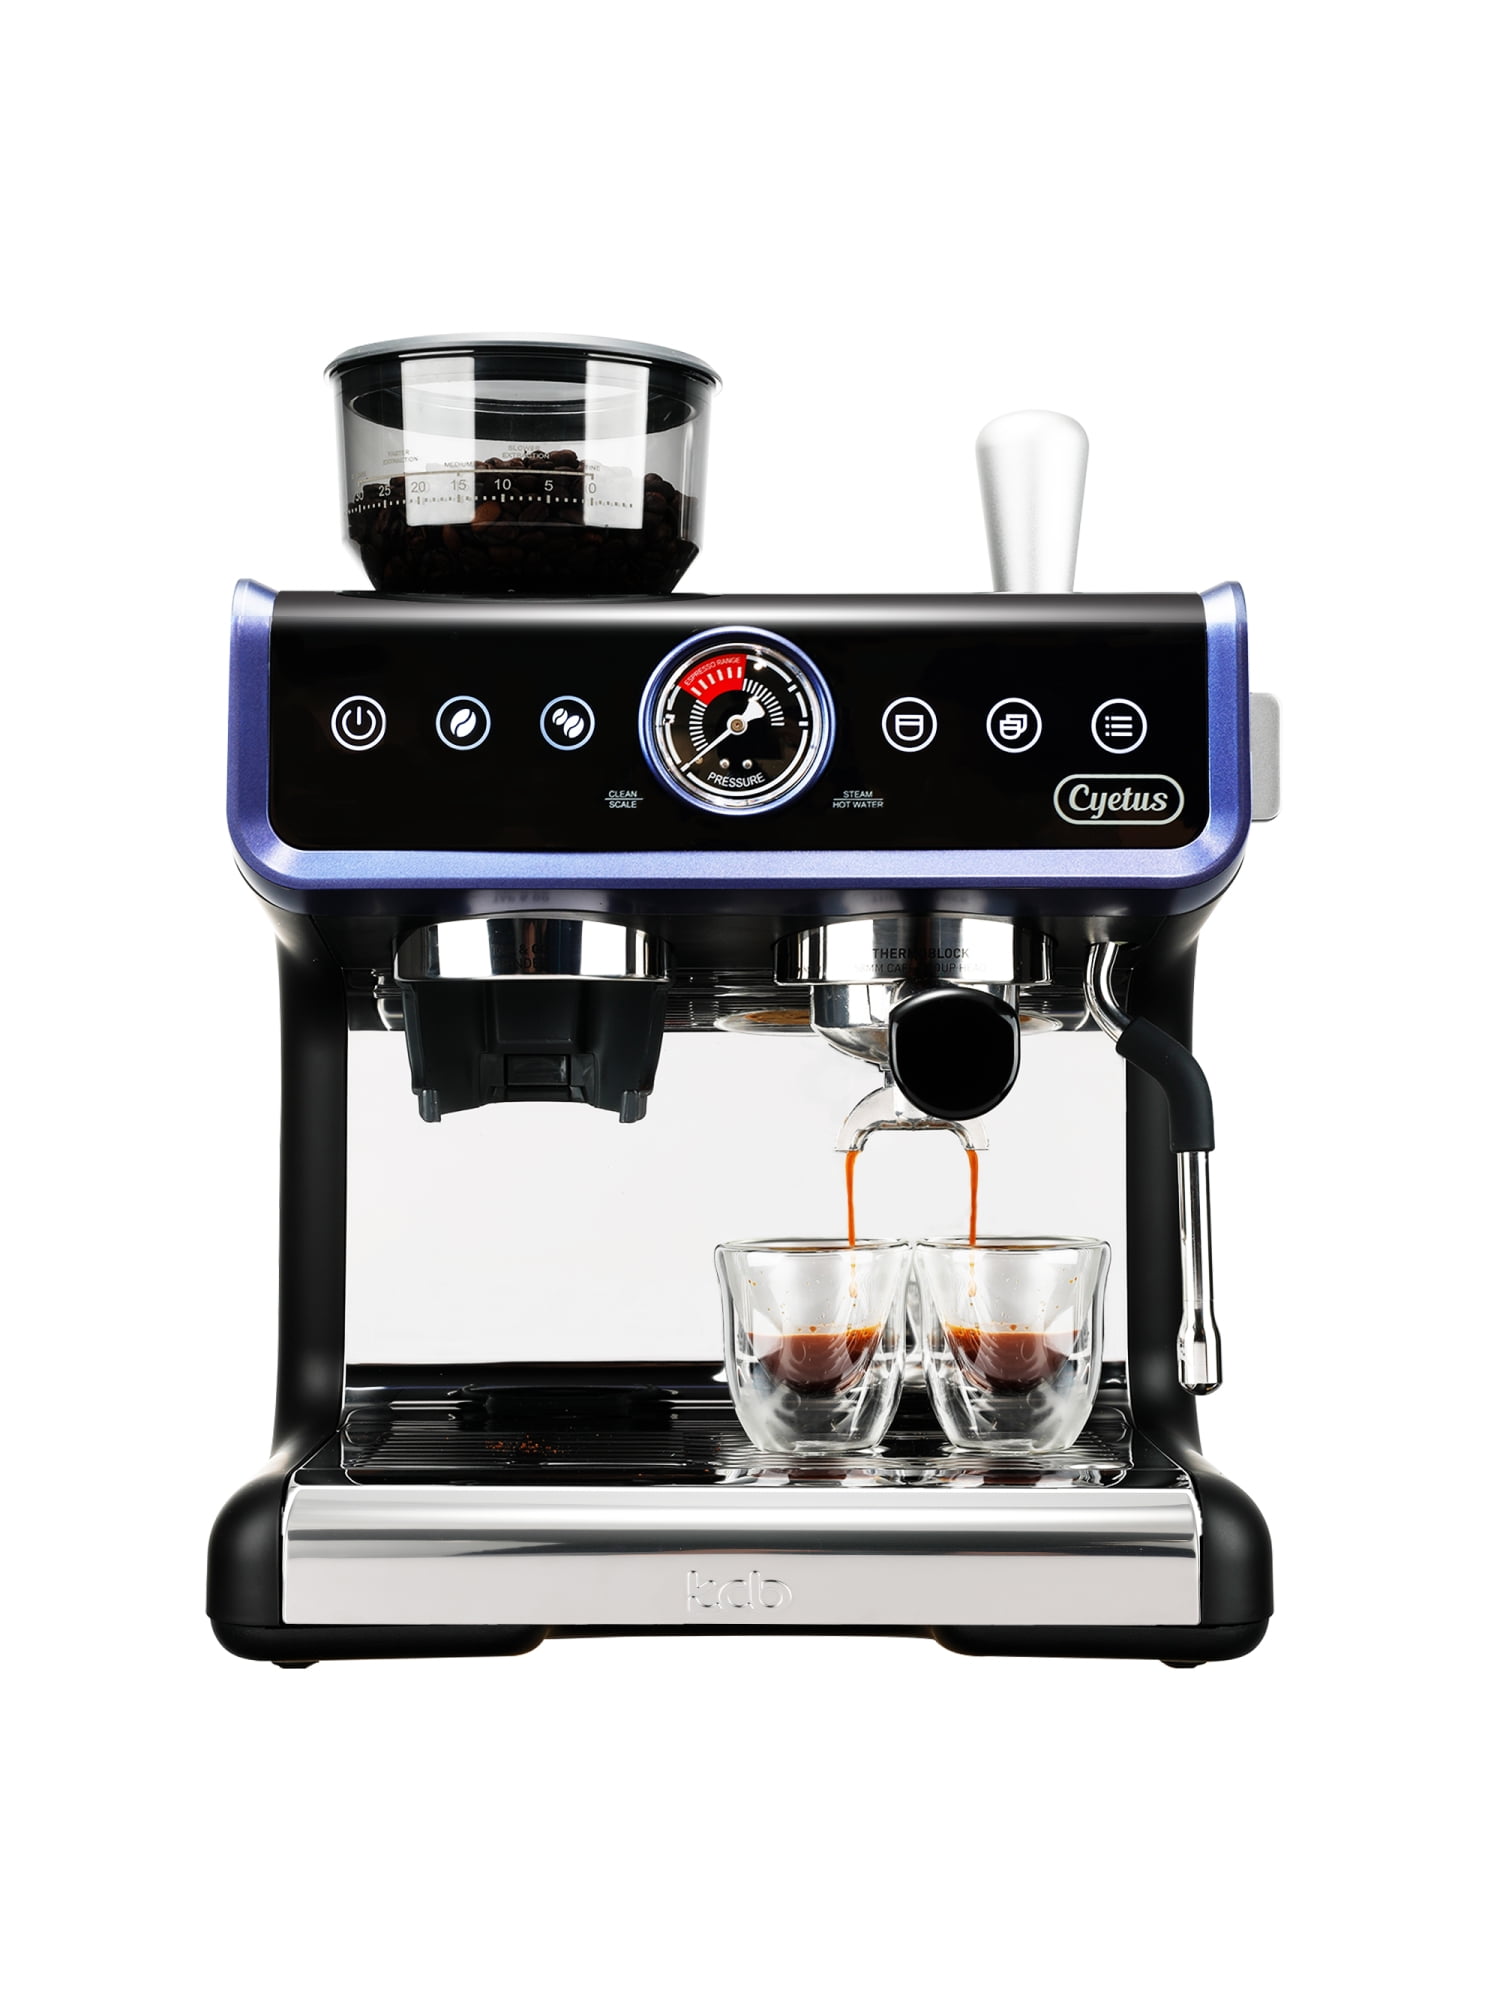 Cyetus All in One Espresso Machine for Home Barista with Coffee Grinder and Milk Steam Wand for Espresso, Cappuccino, and Latte, Gray